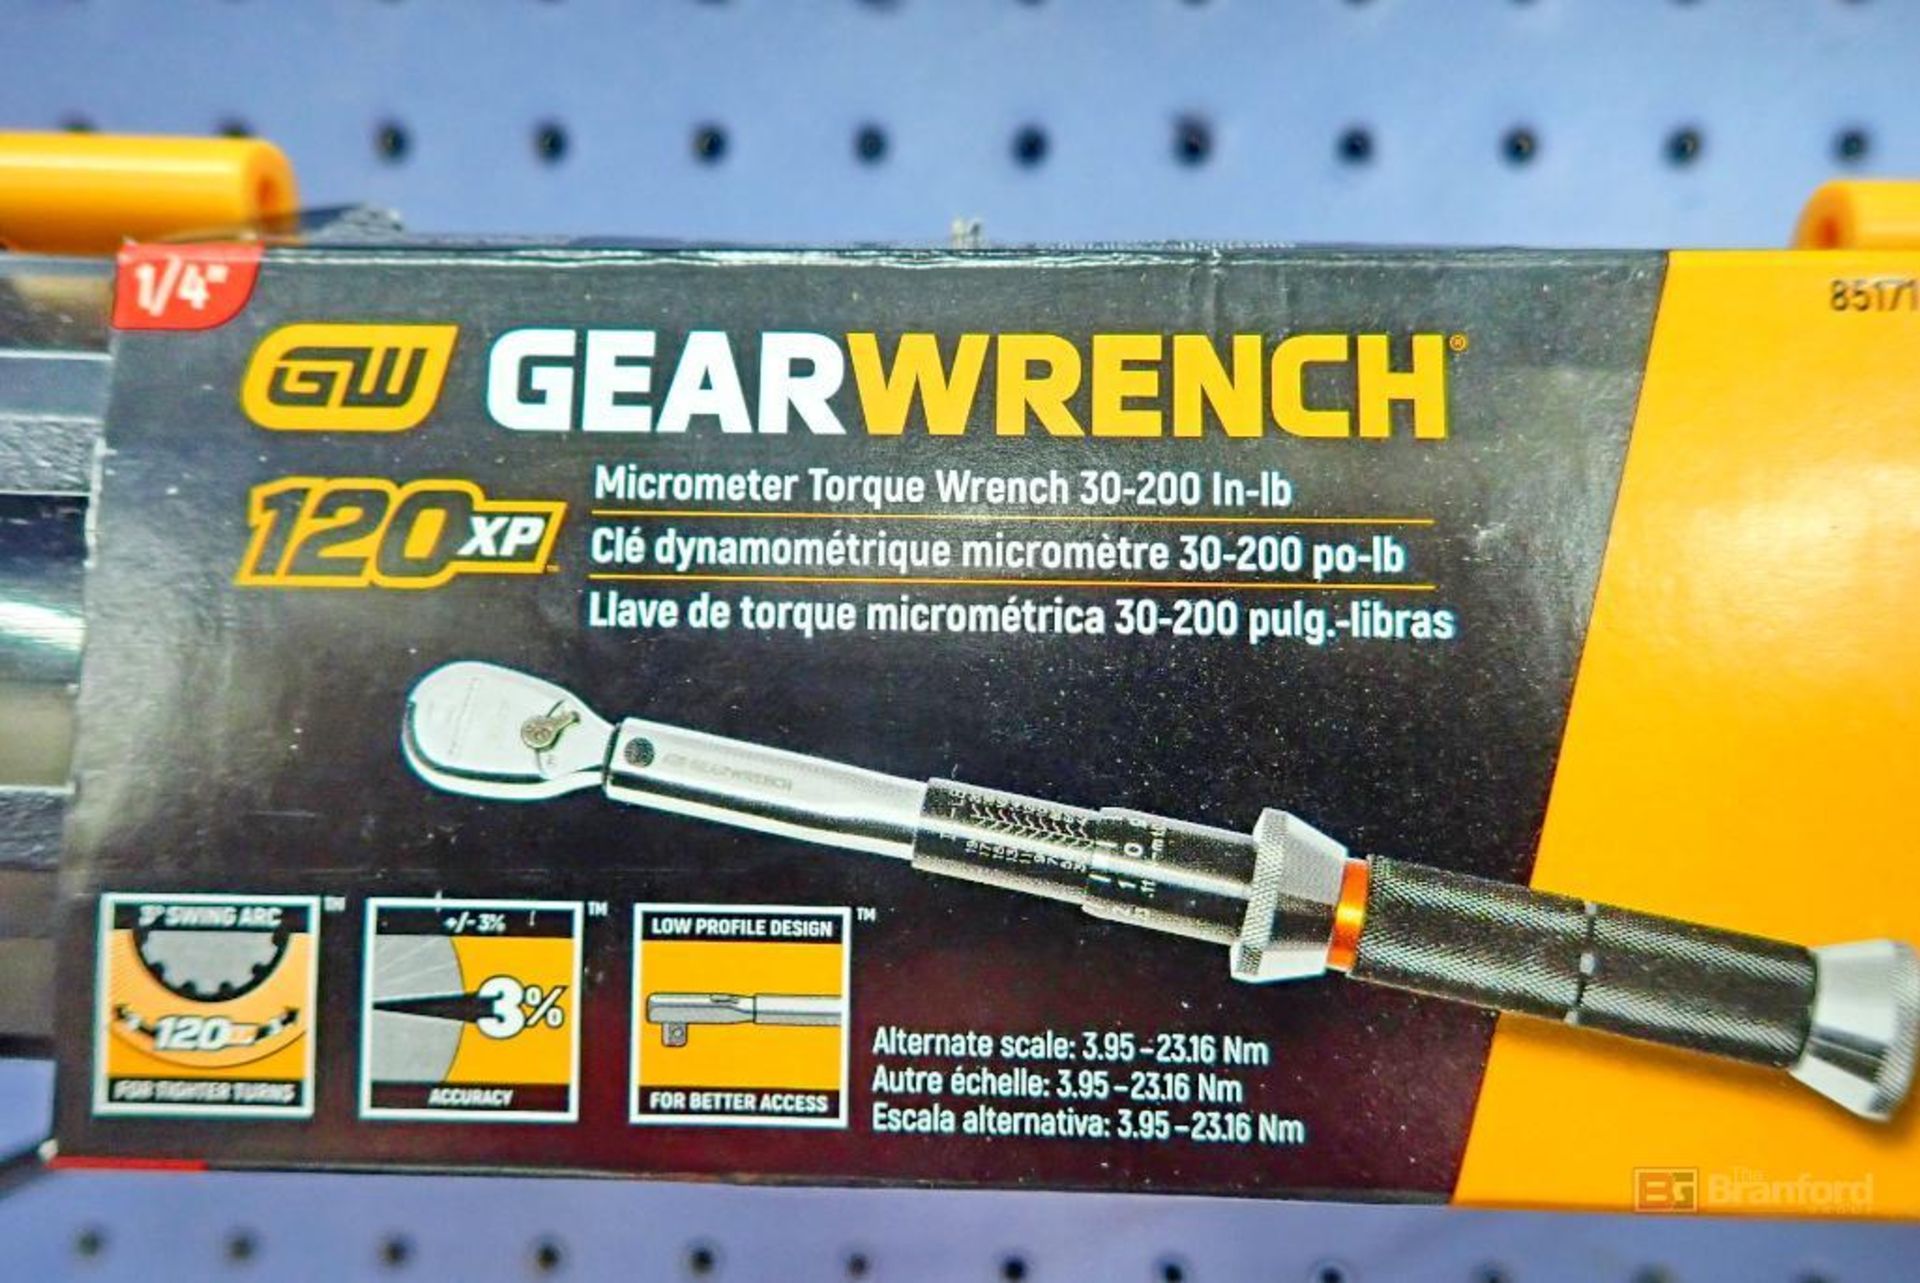 GearWrench 120XP 85171 Micrometer Torque Wrench - Image 2 of 5